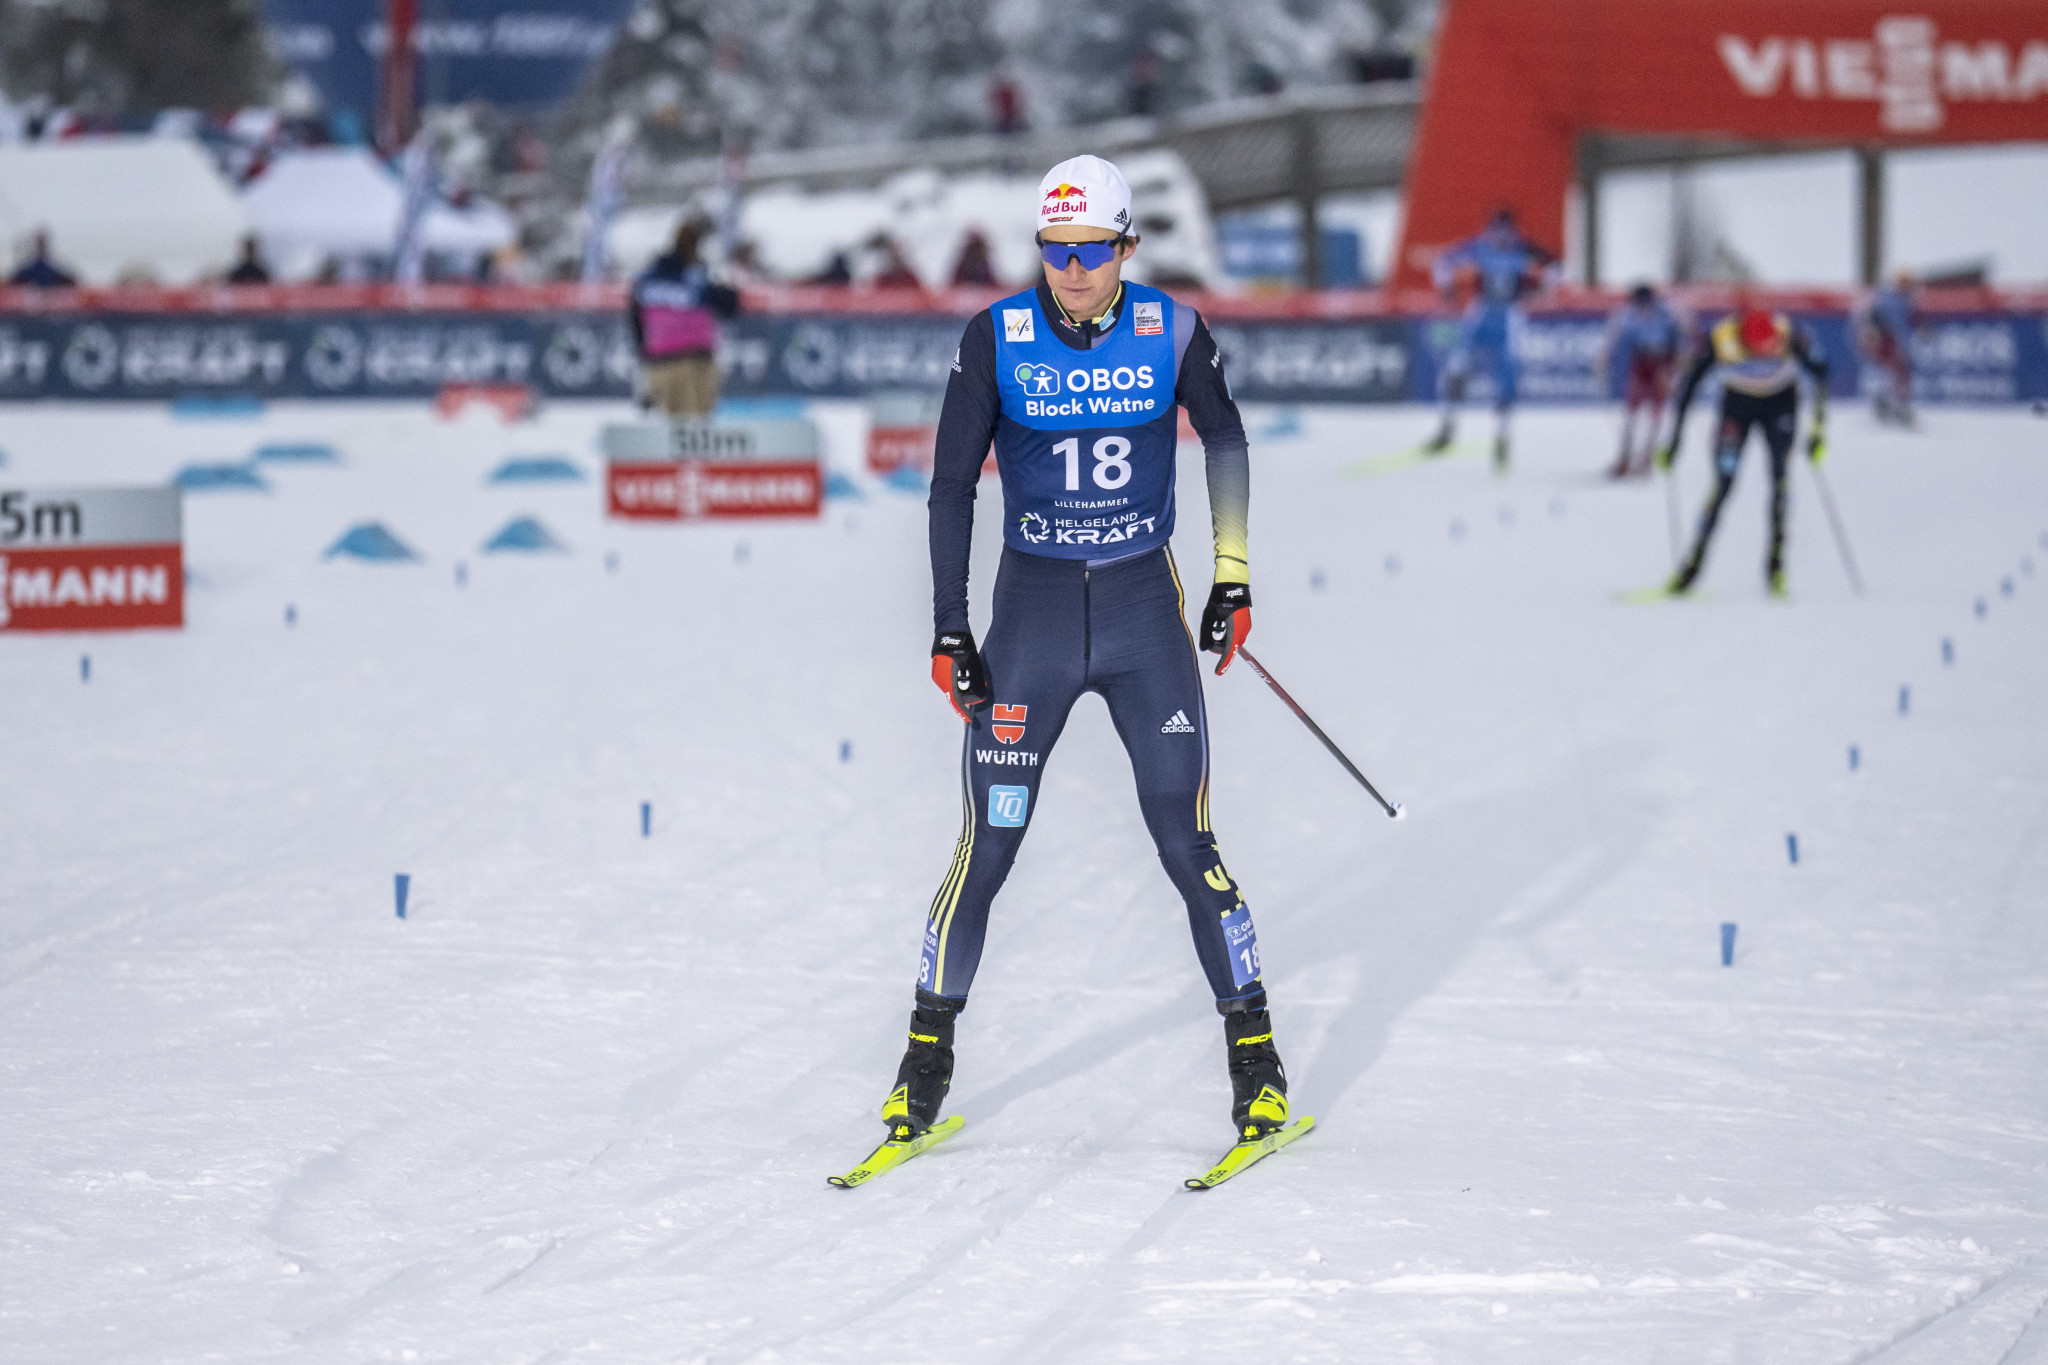 Geiger leads Nordic Combined World Cup after weather forces format change